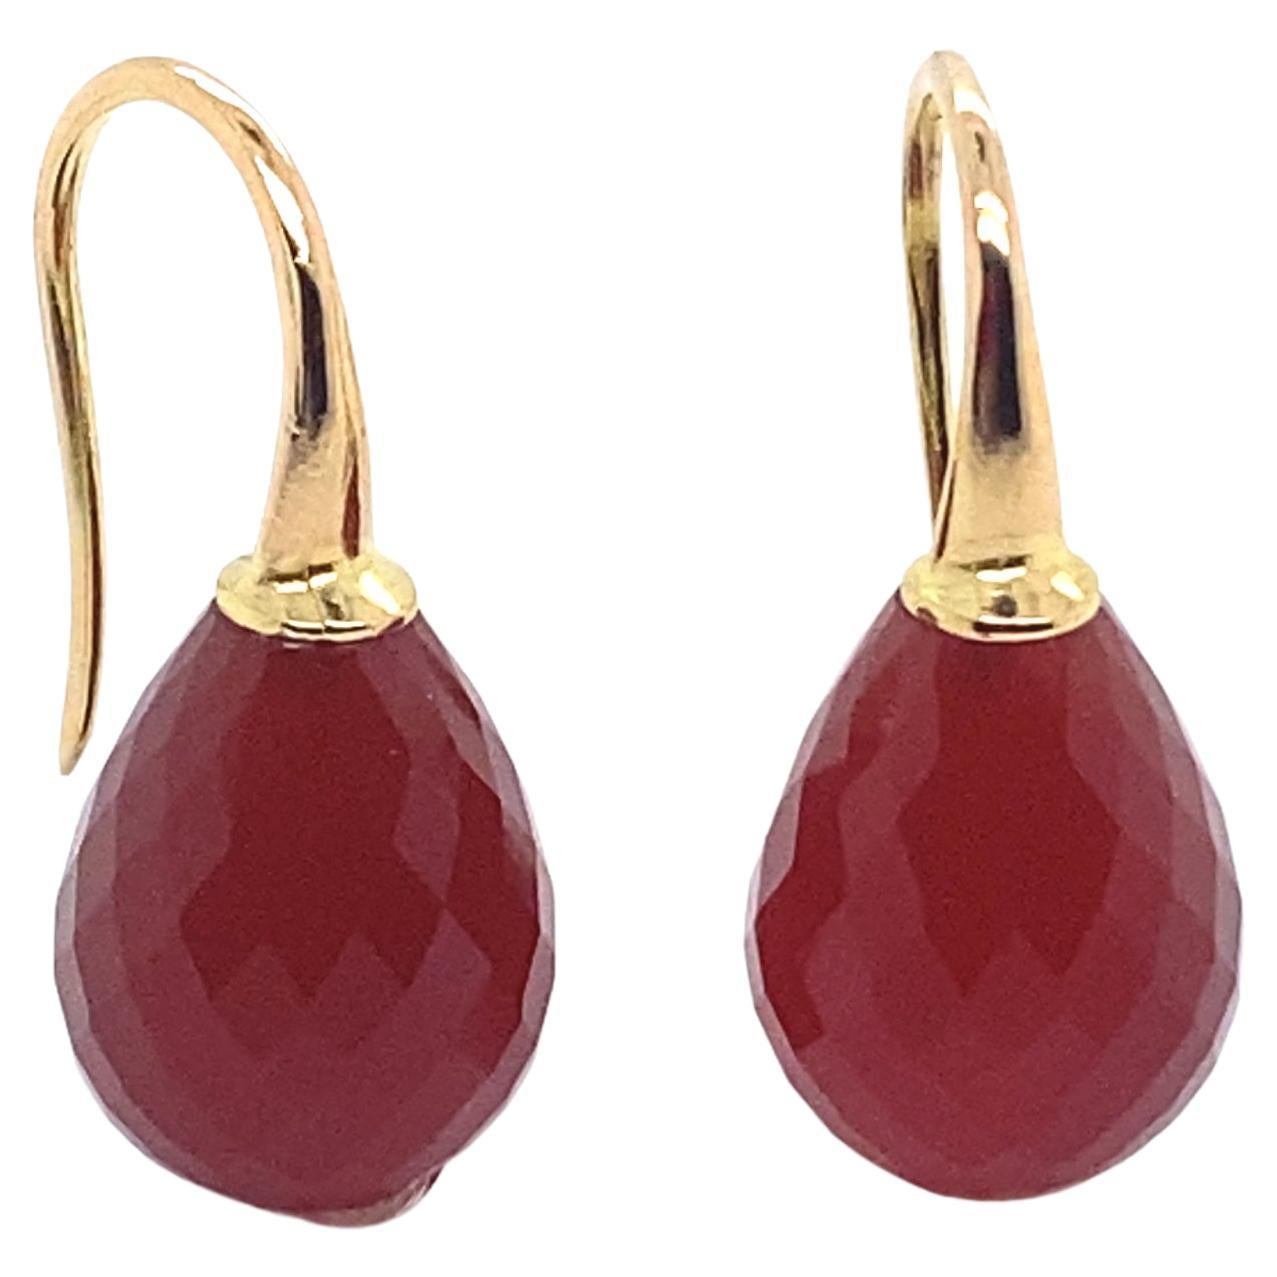 Welcome to our showcase page, where we are delighted to present this magnificent 18-carat gold earring, accompanied by a briolette cut in red agate, a unique piece that combines elegance and originality.

This 18-carat gold earring is a work of